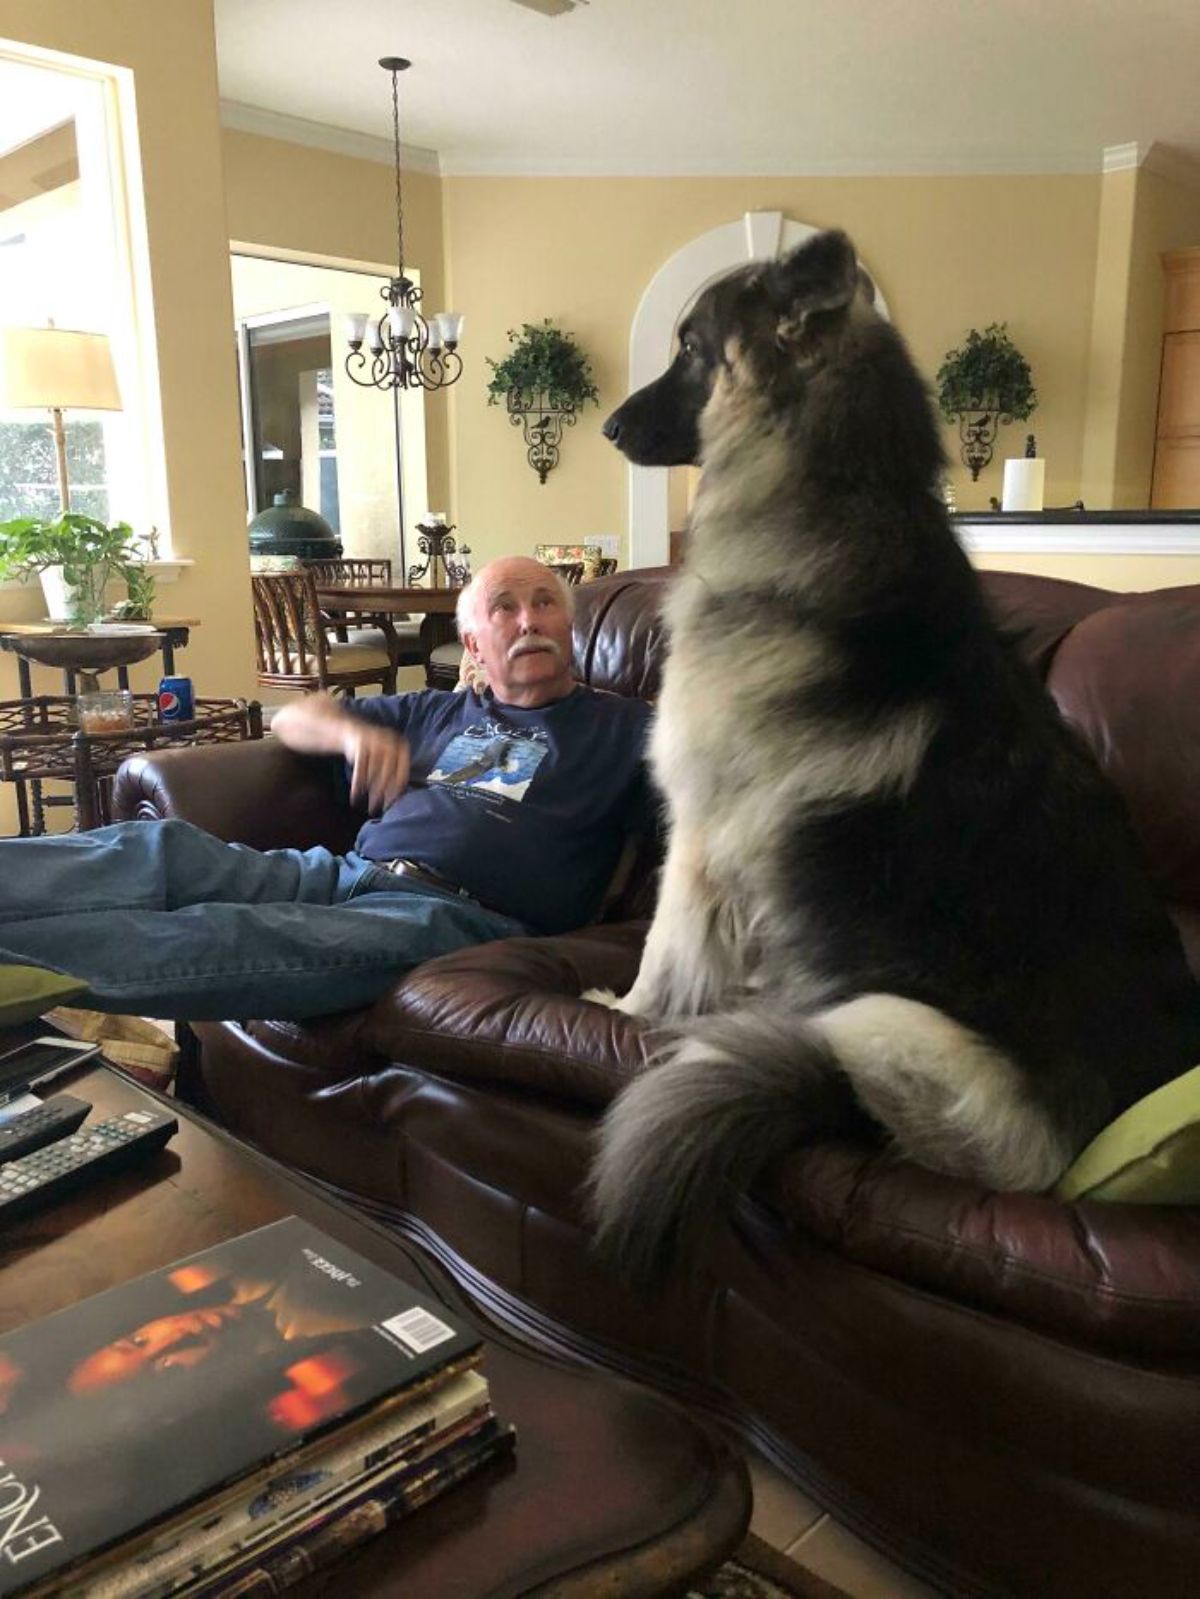 large brown and black dog sitting on a brown couch next to an old man